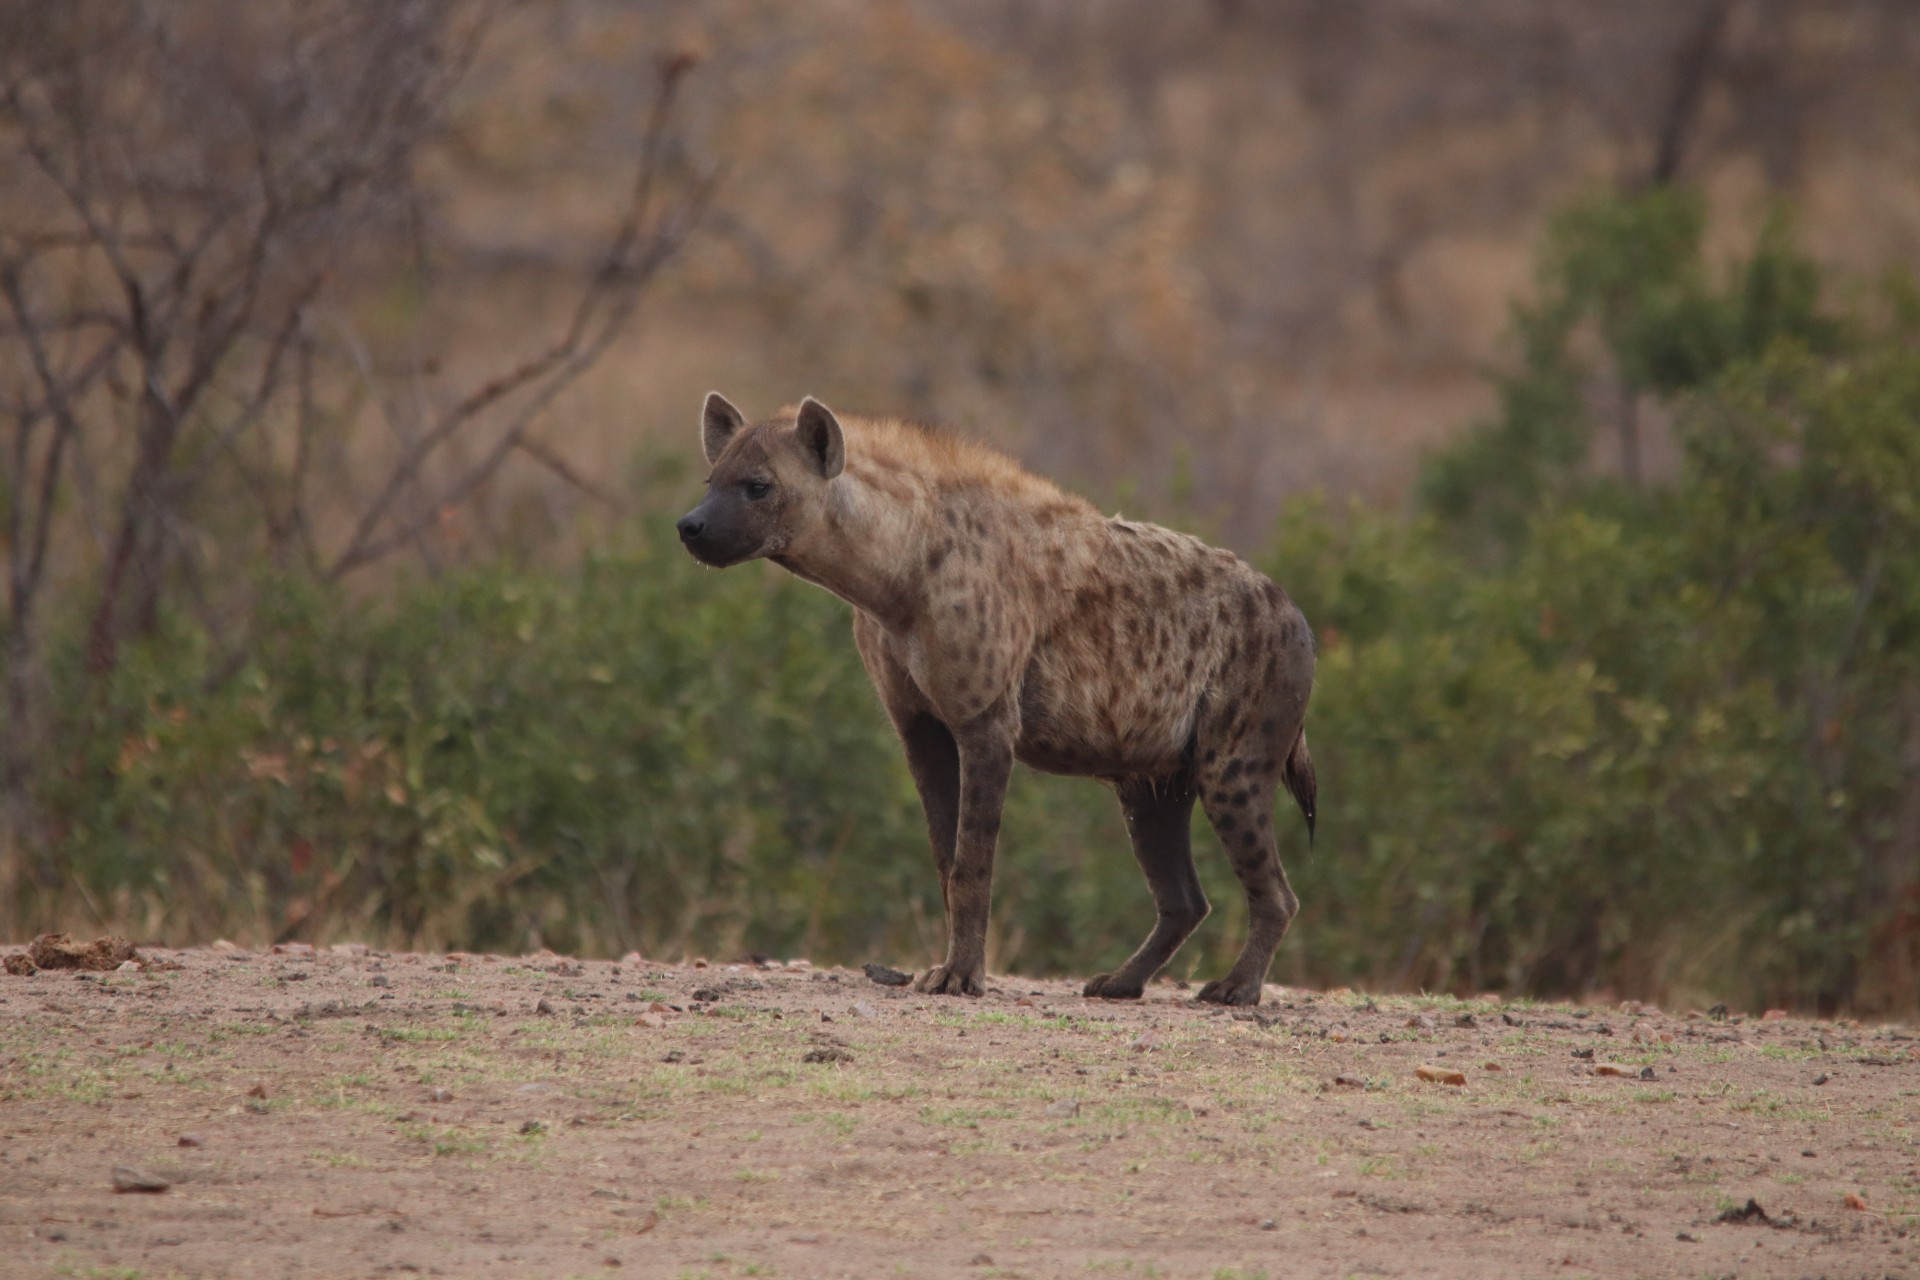 A hyena standing alone in the bush